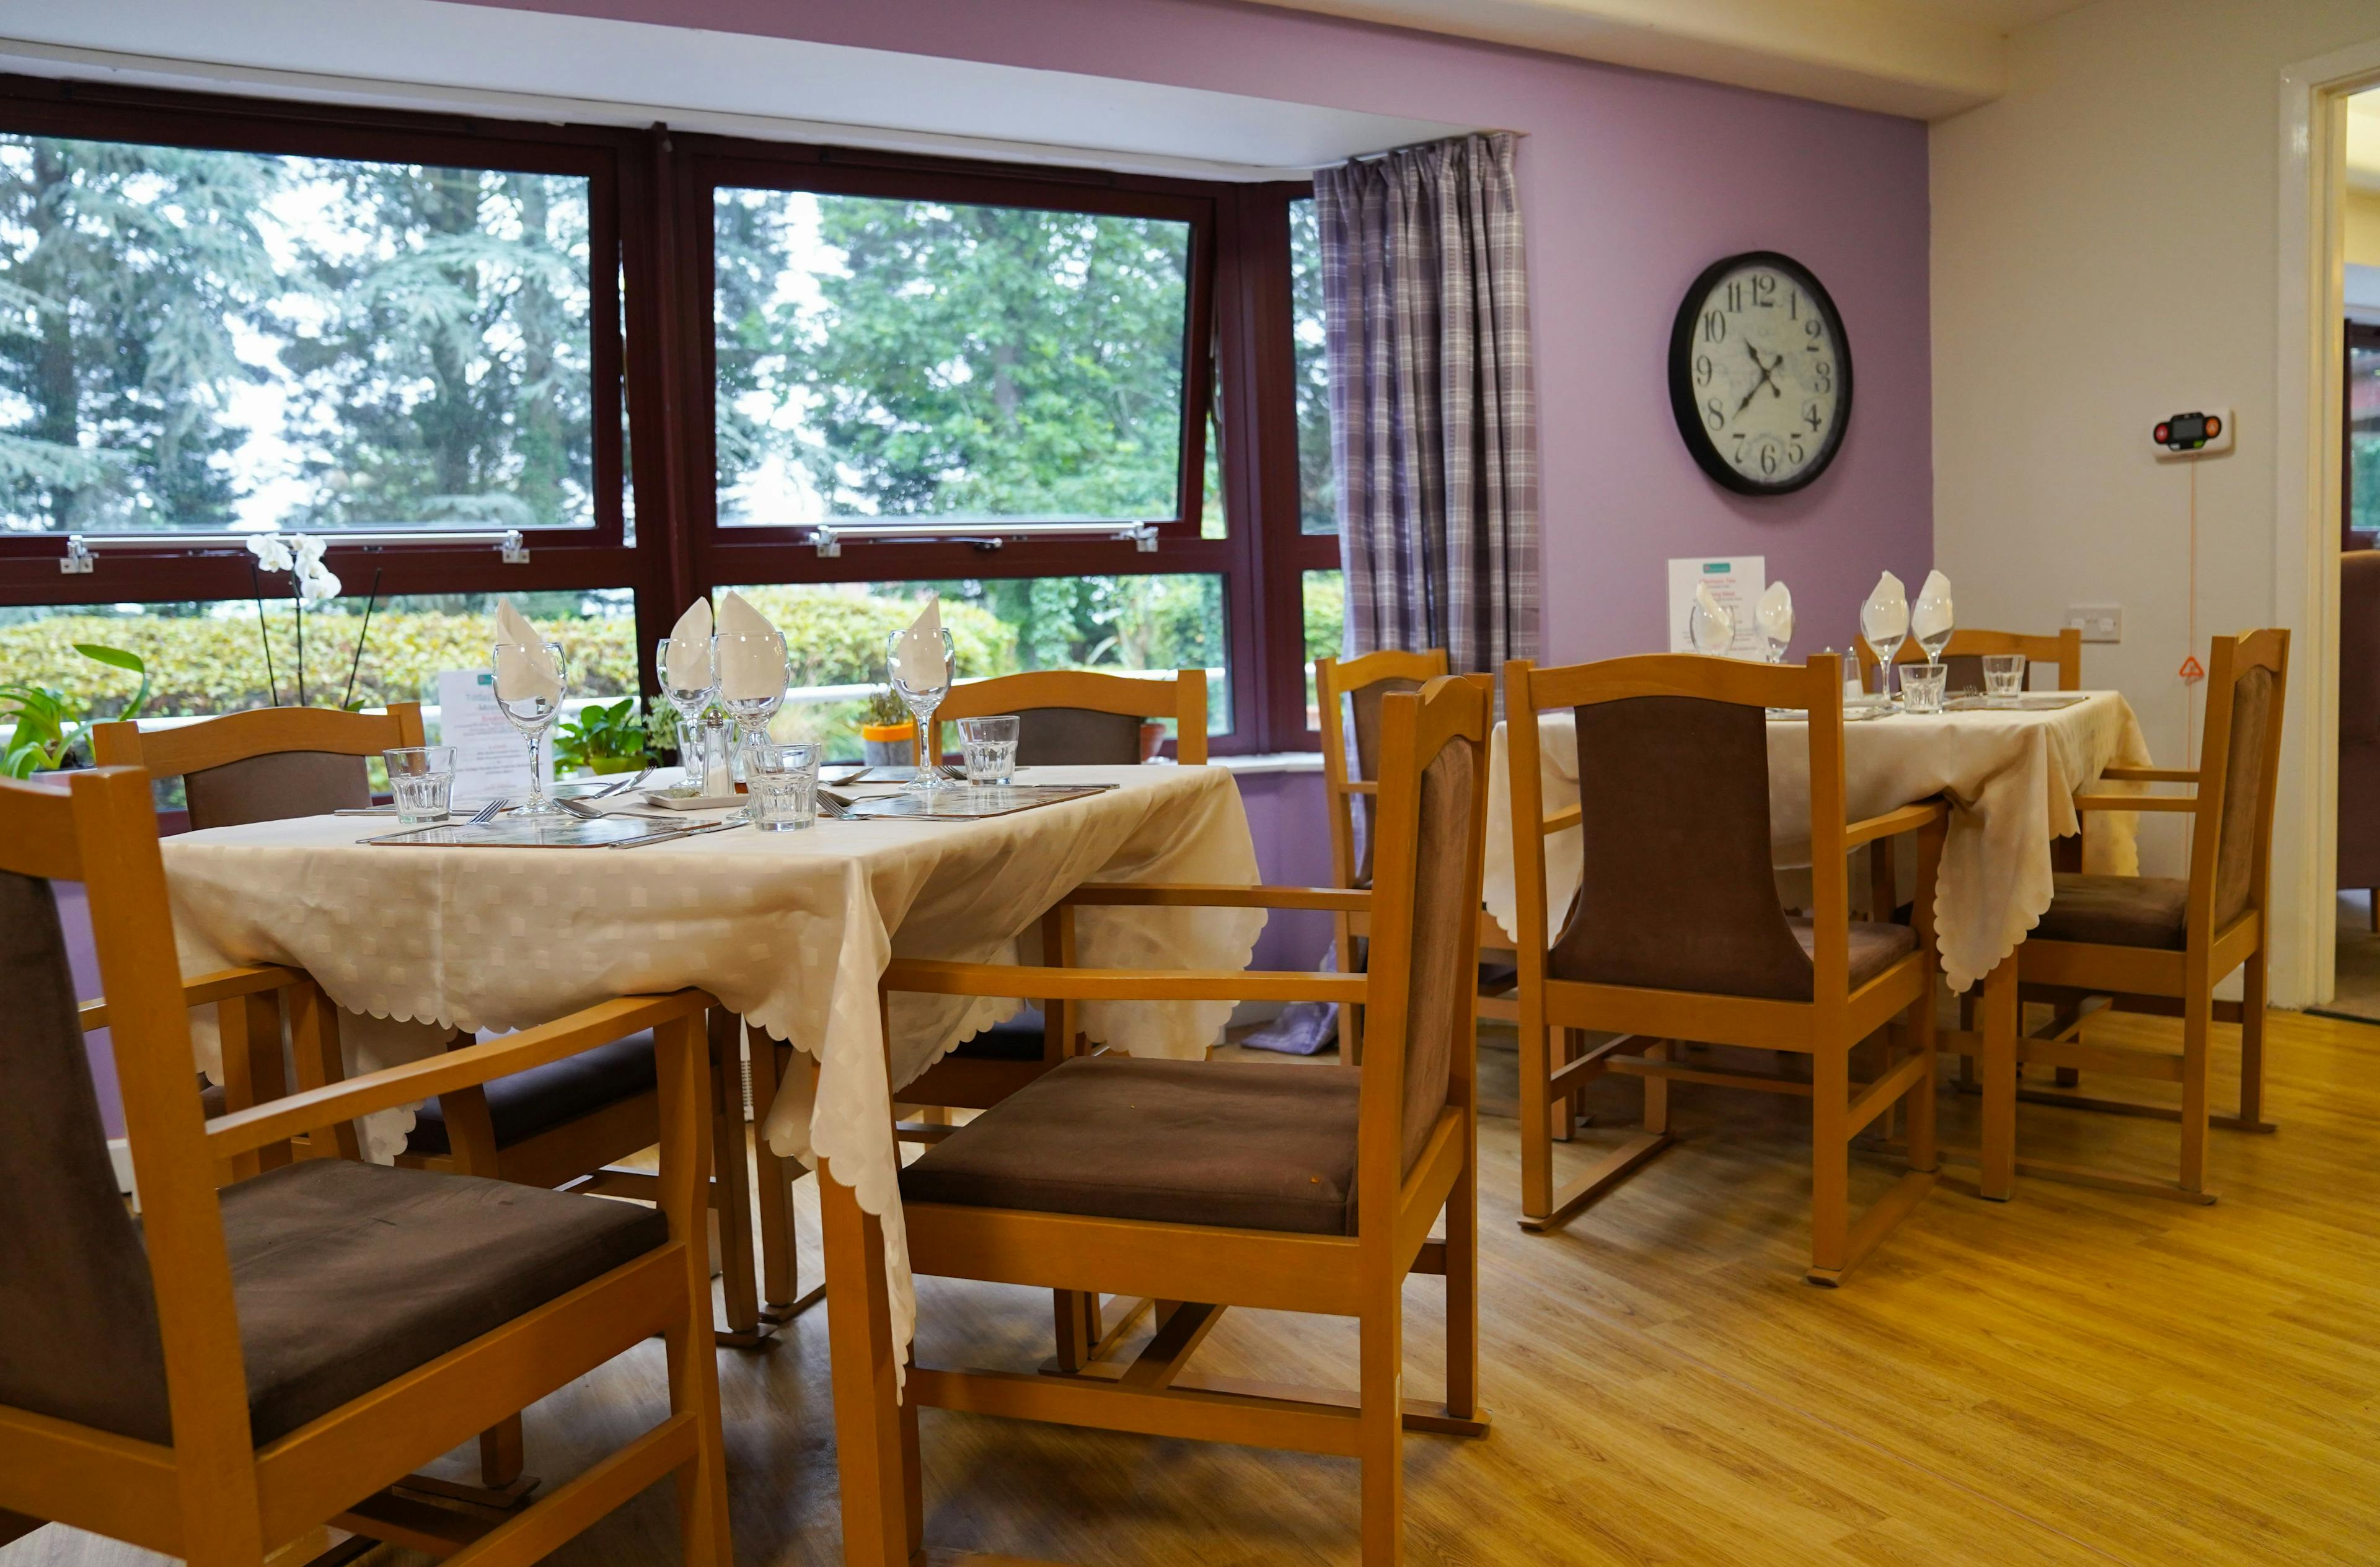 Dining room of Hastings care home in Malvern, West Midlands